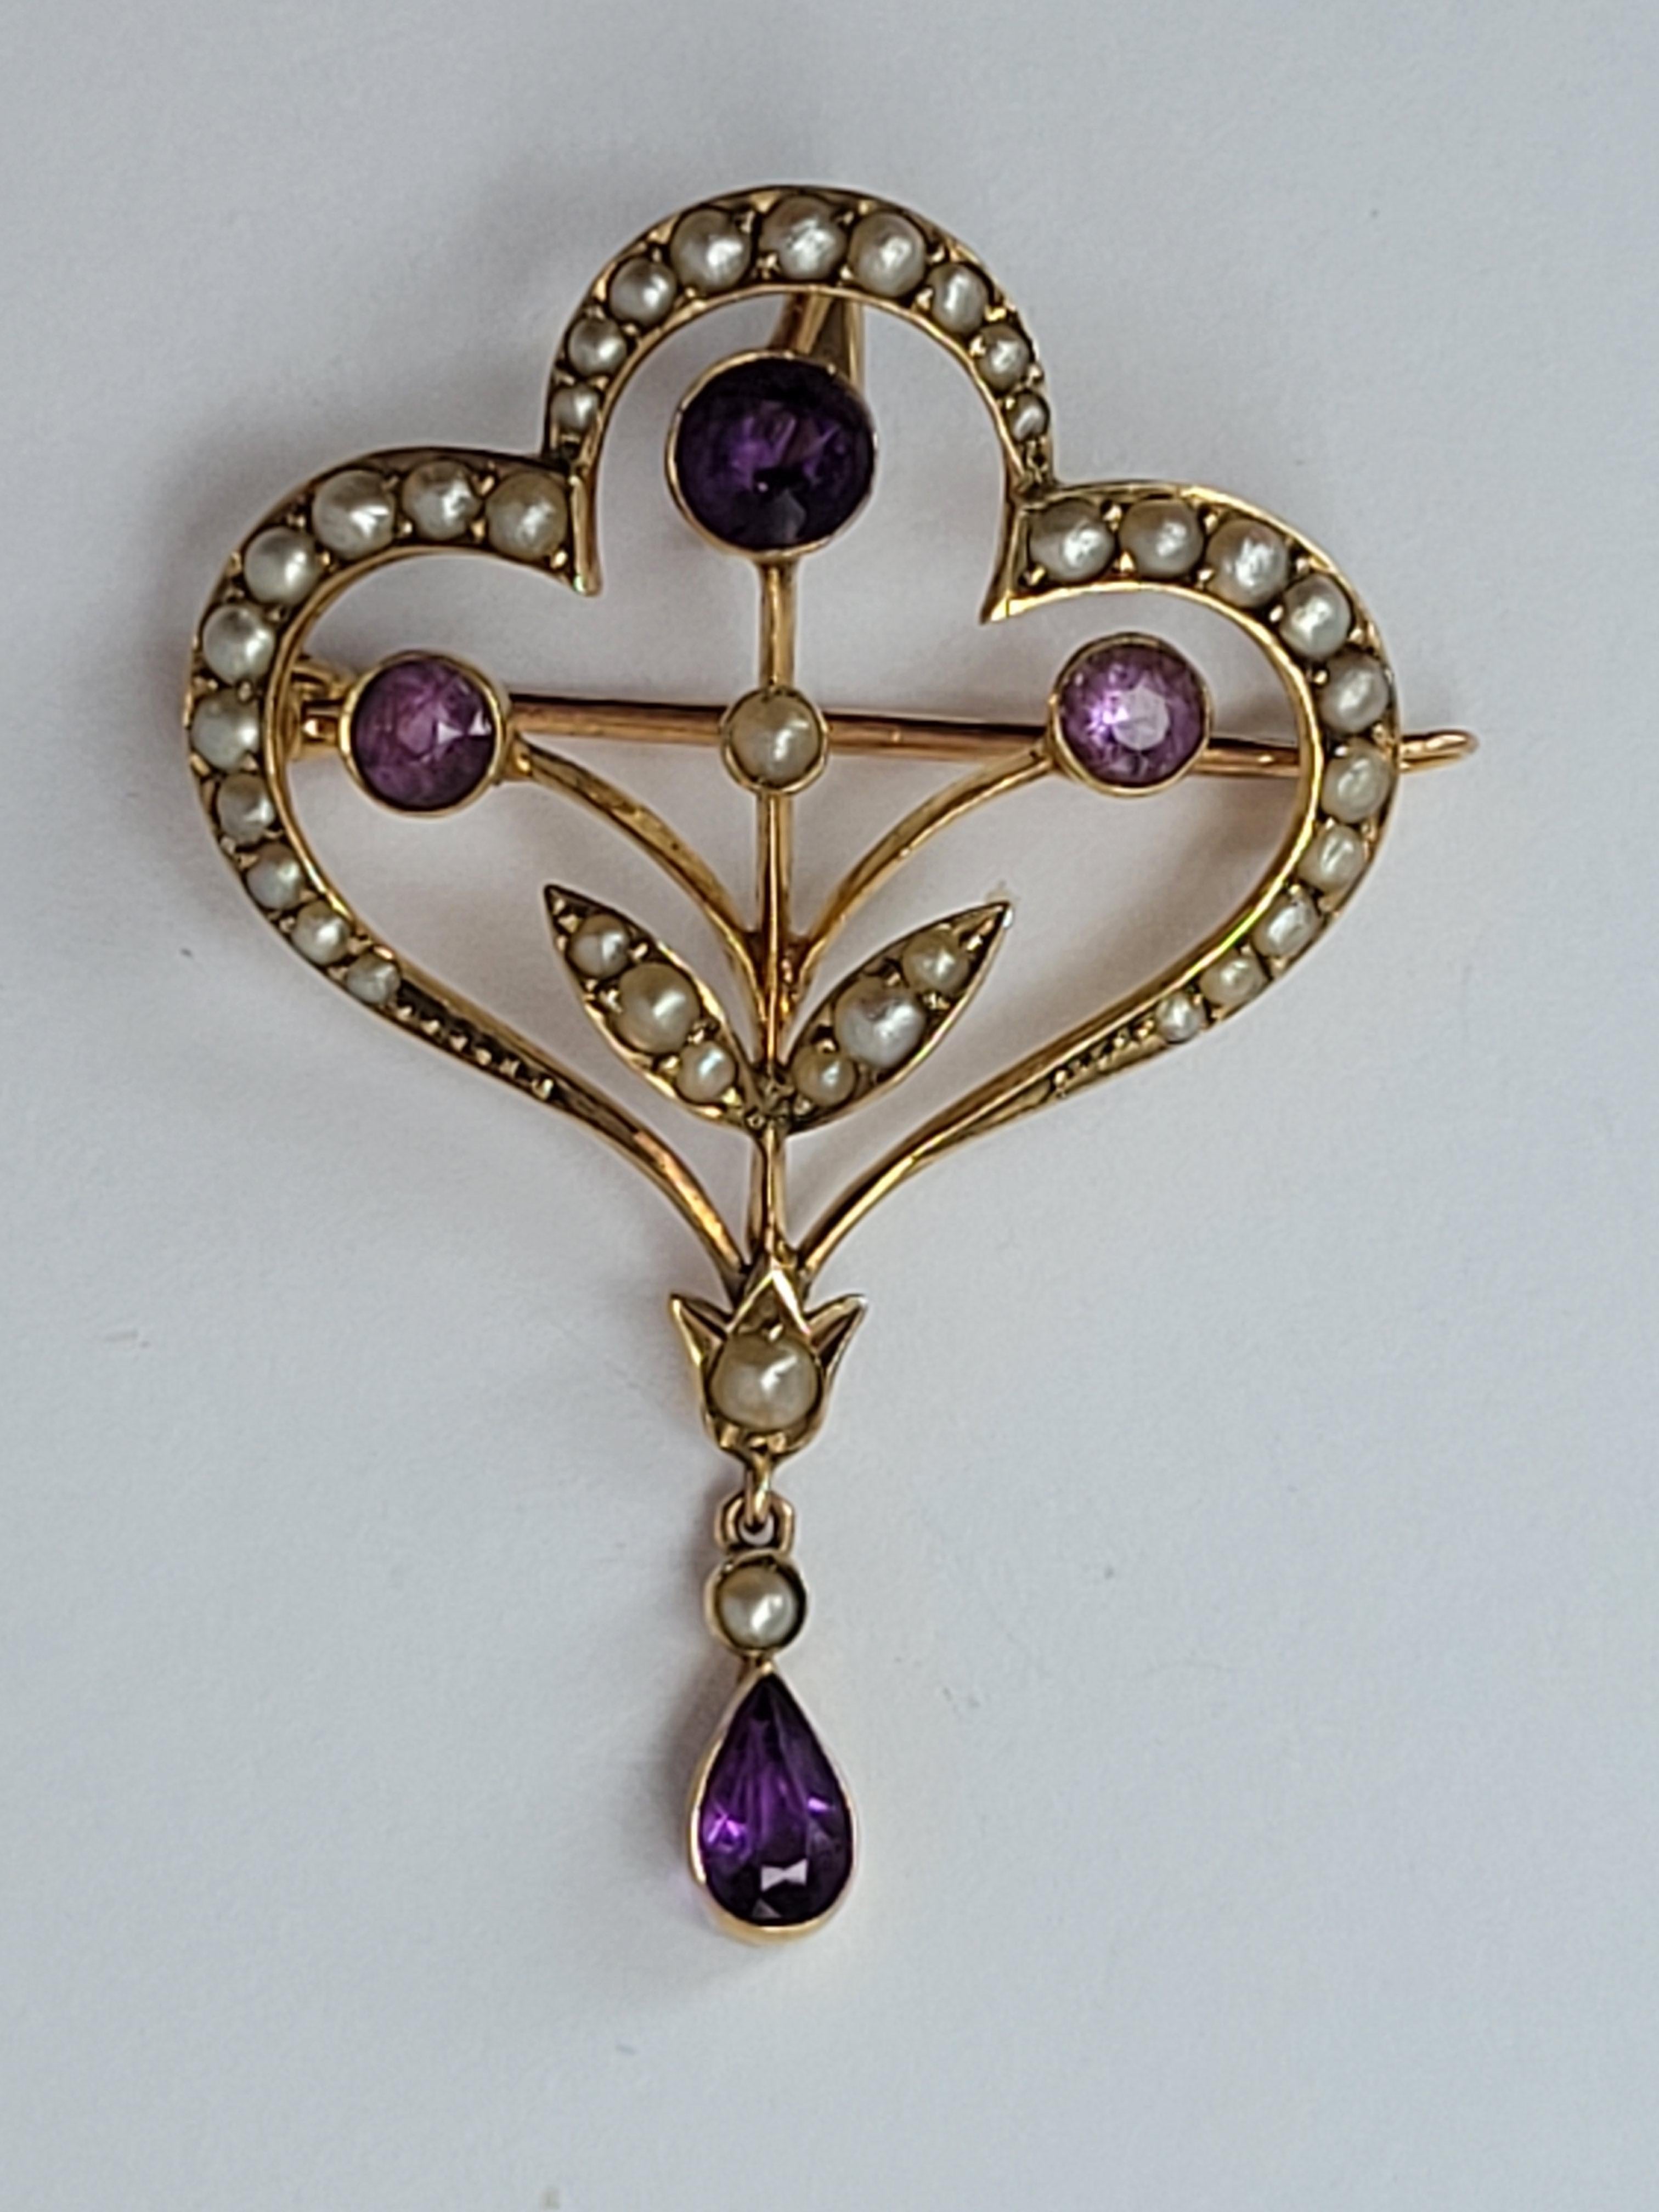 Round Cut Antique Edwardian Amethyst Pearl Gold Brooch Pendant Necklace For Sale